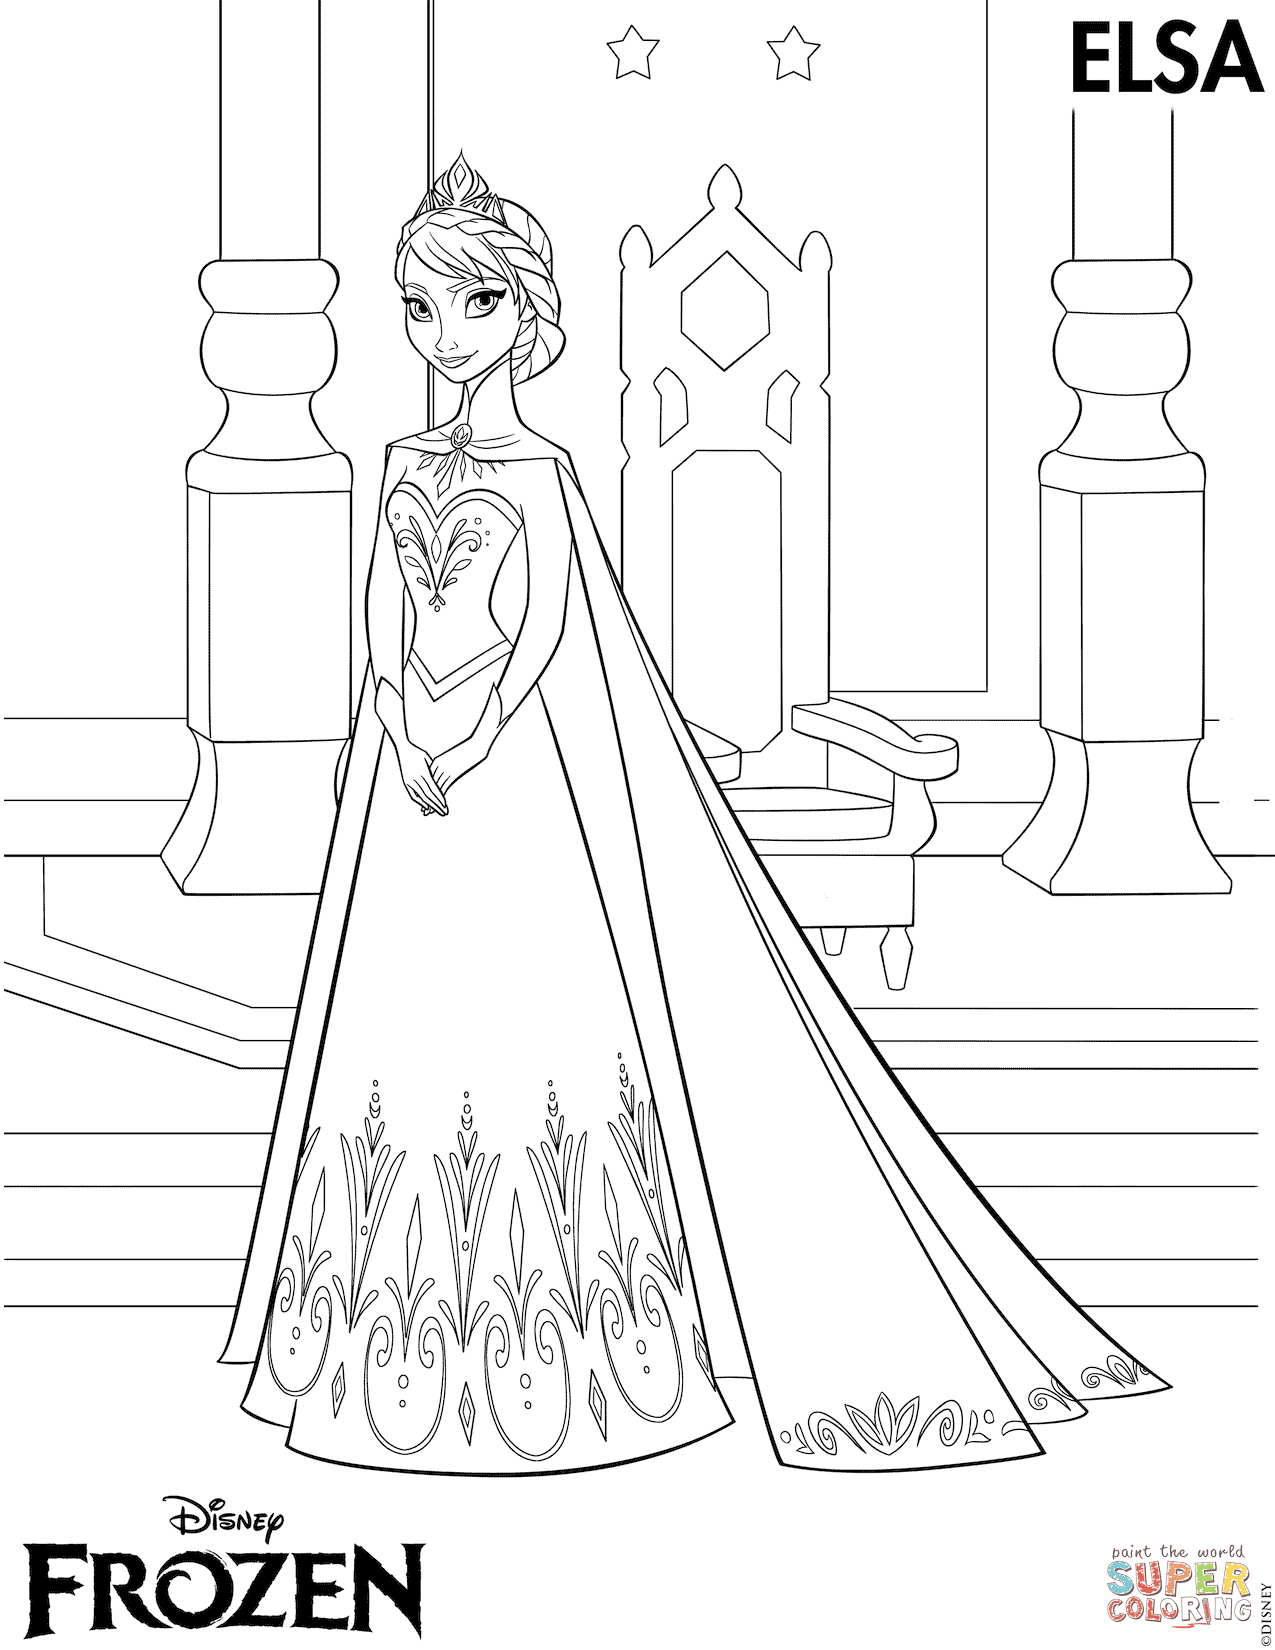 Download Elsa Coronation Coloring Page - 274+ SVG Images File for Cricut, Silhouette and Other Machine